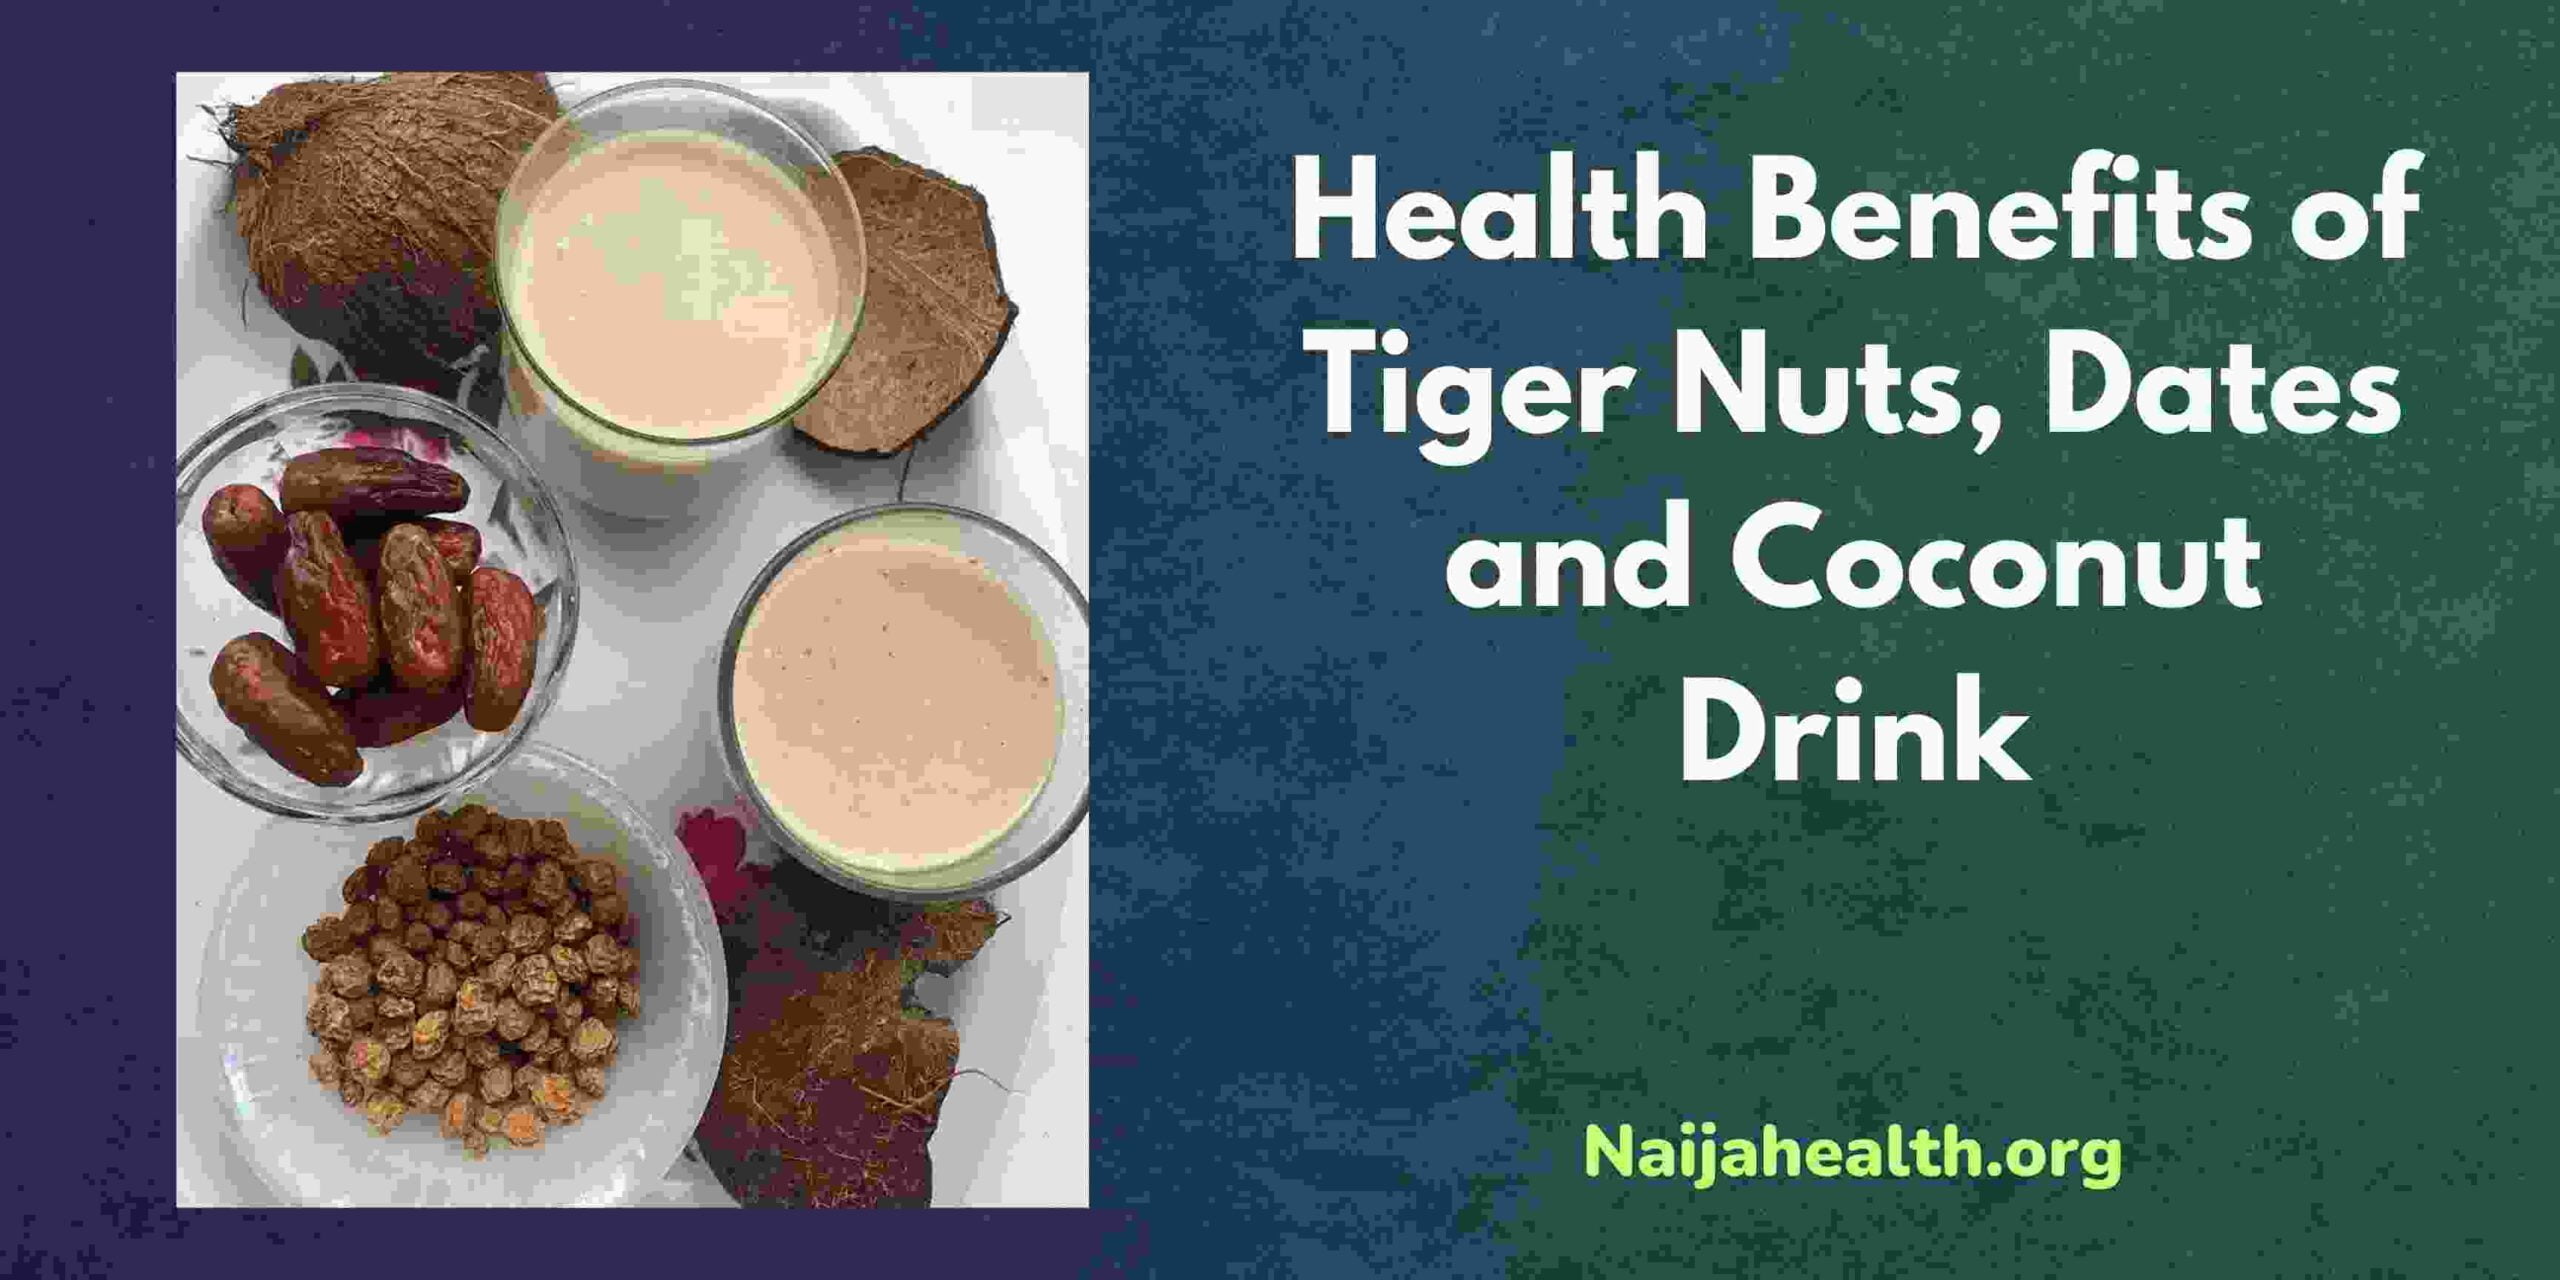 Health Benefits of Tiger Nuts, Dates and Coconut Drink